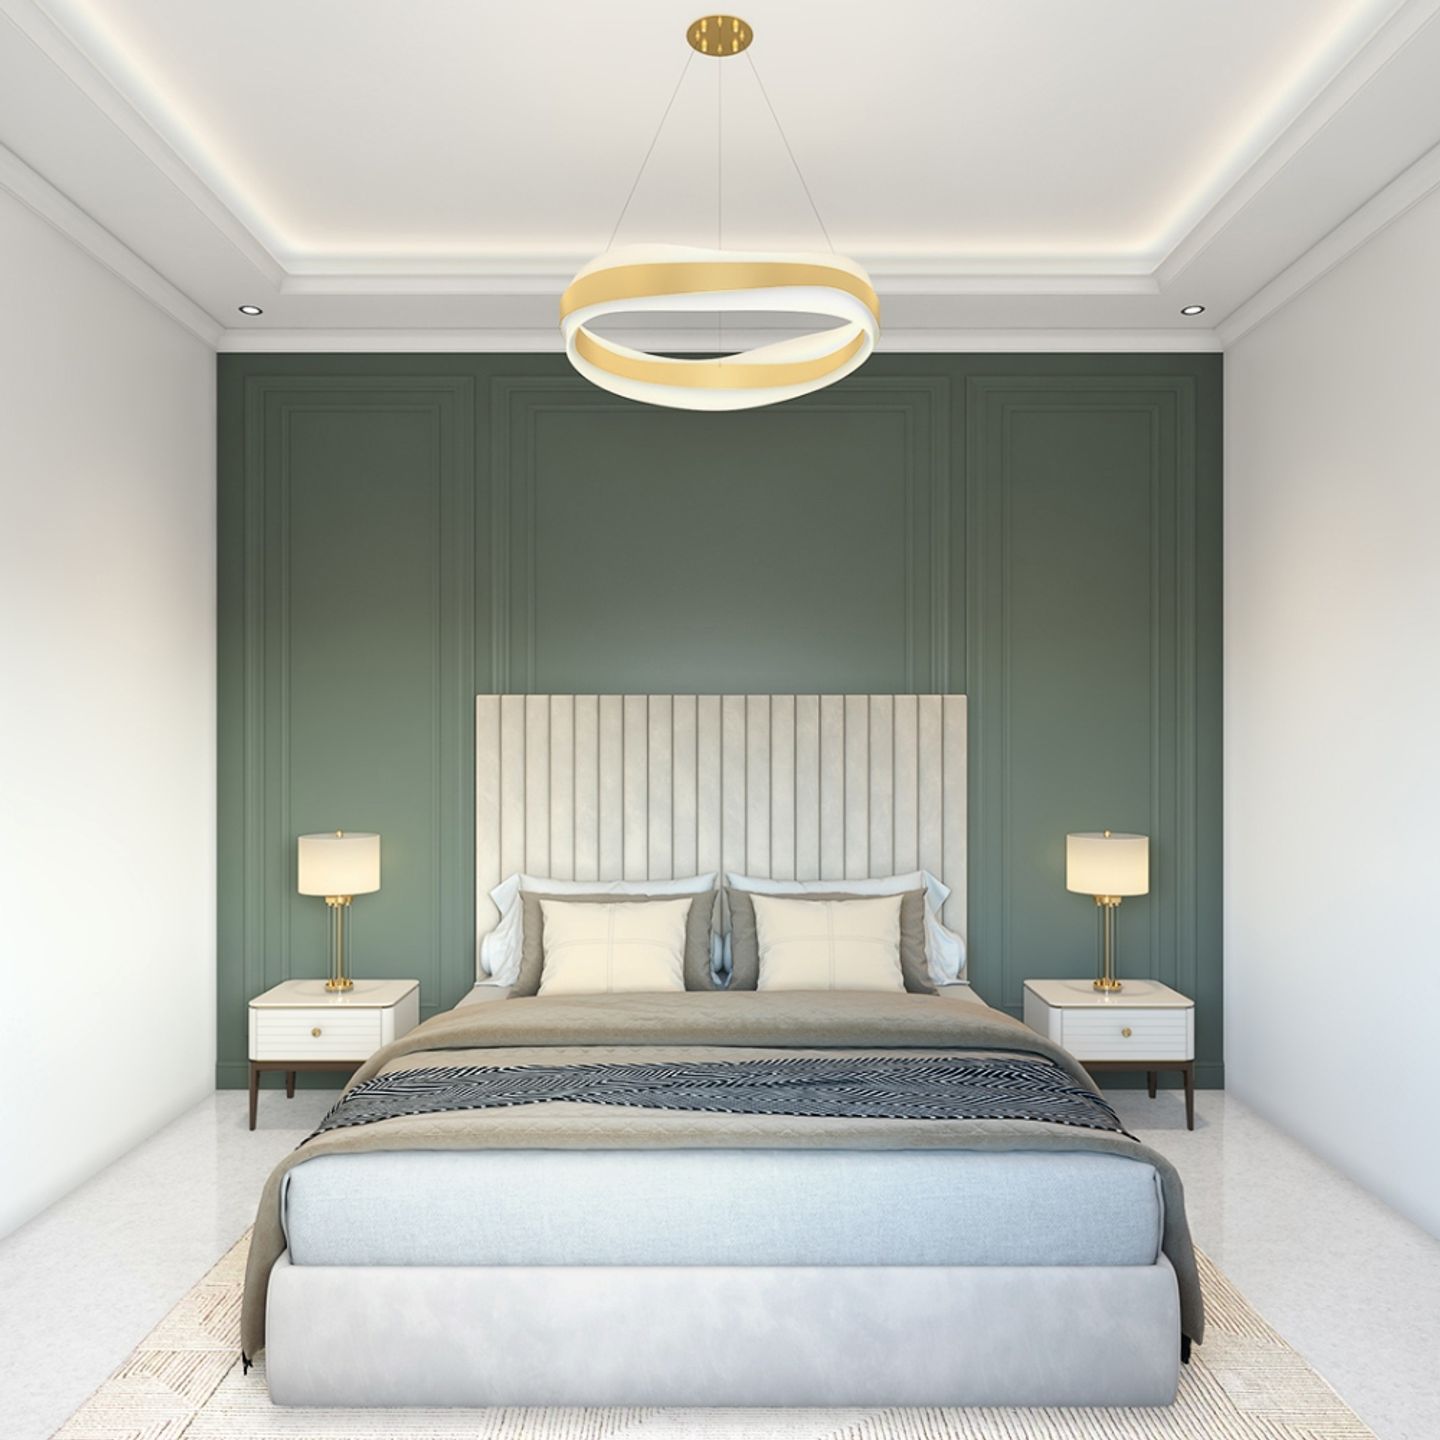 11x11 Ft Master Bedroom Design With Green Accent Wall And Trims - Livspace